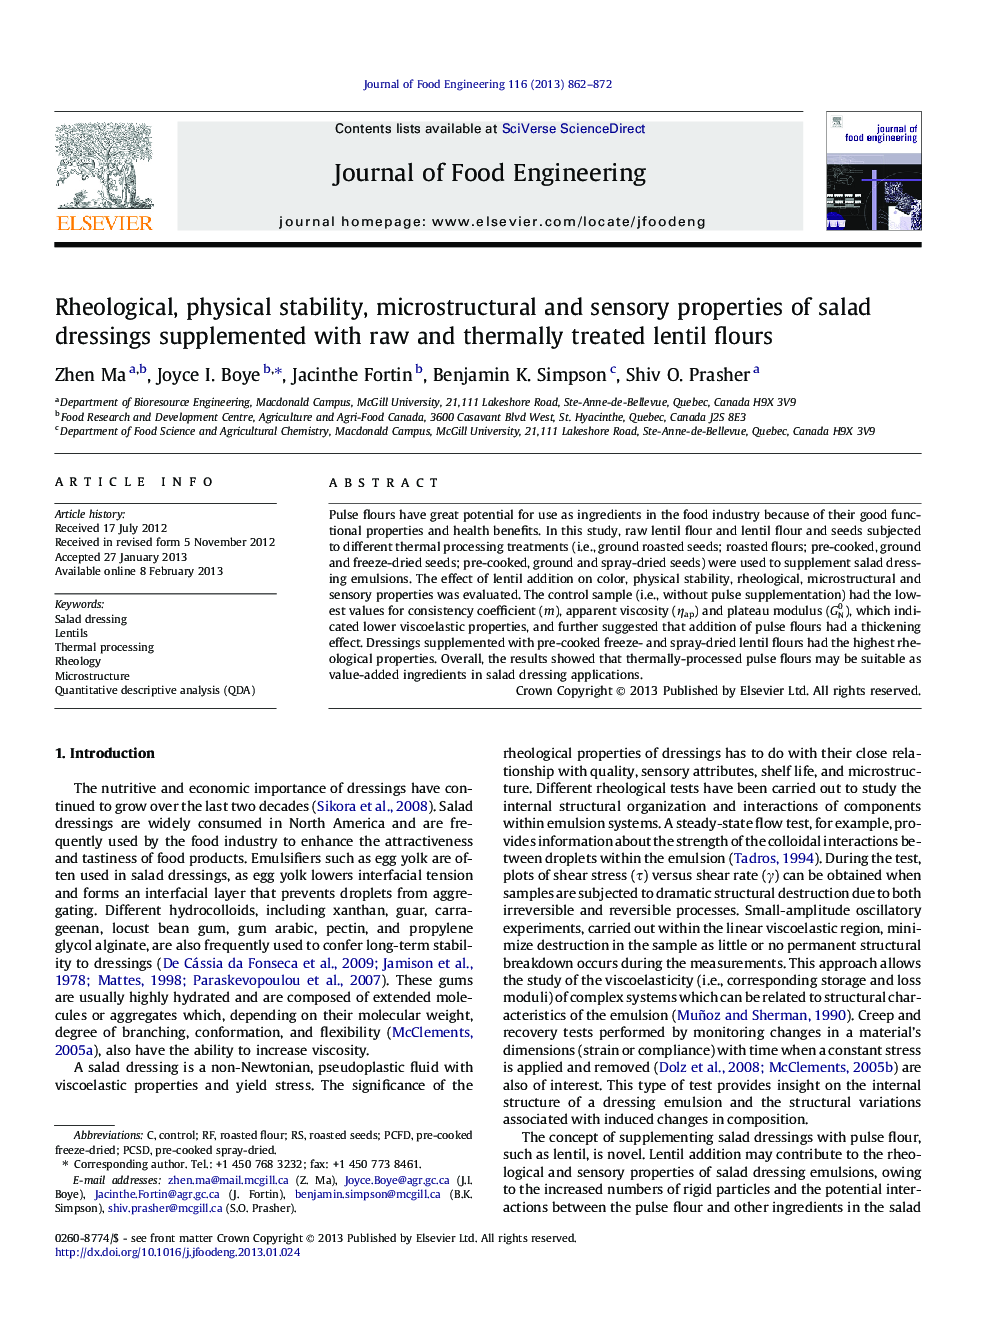 Rheological, physical stability, microstructural and sensory properties of salad dressings supplemented with raw and thermally treated lentil flours